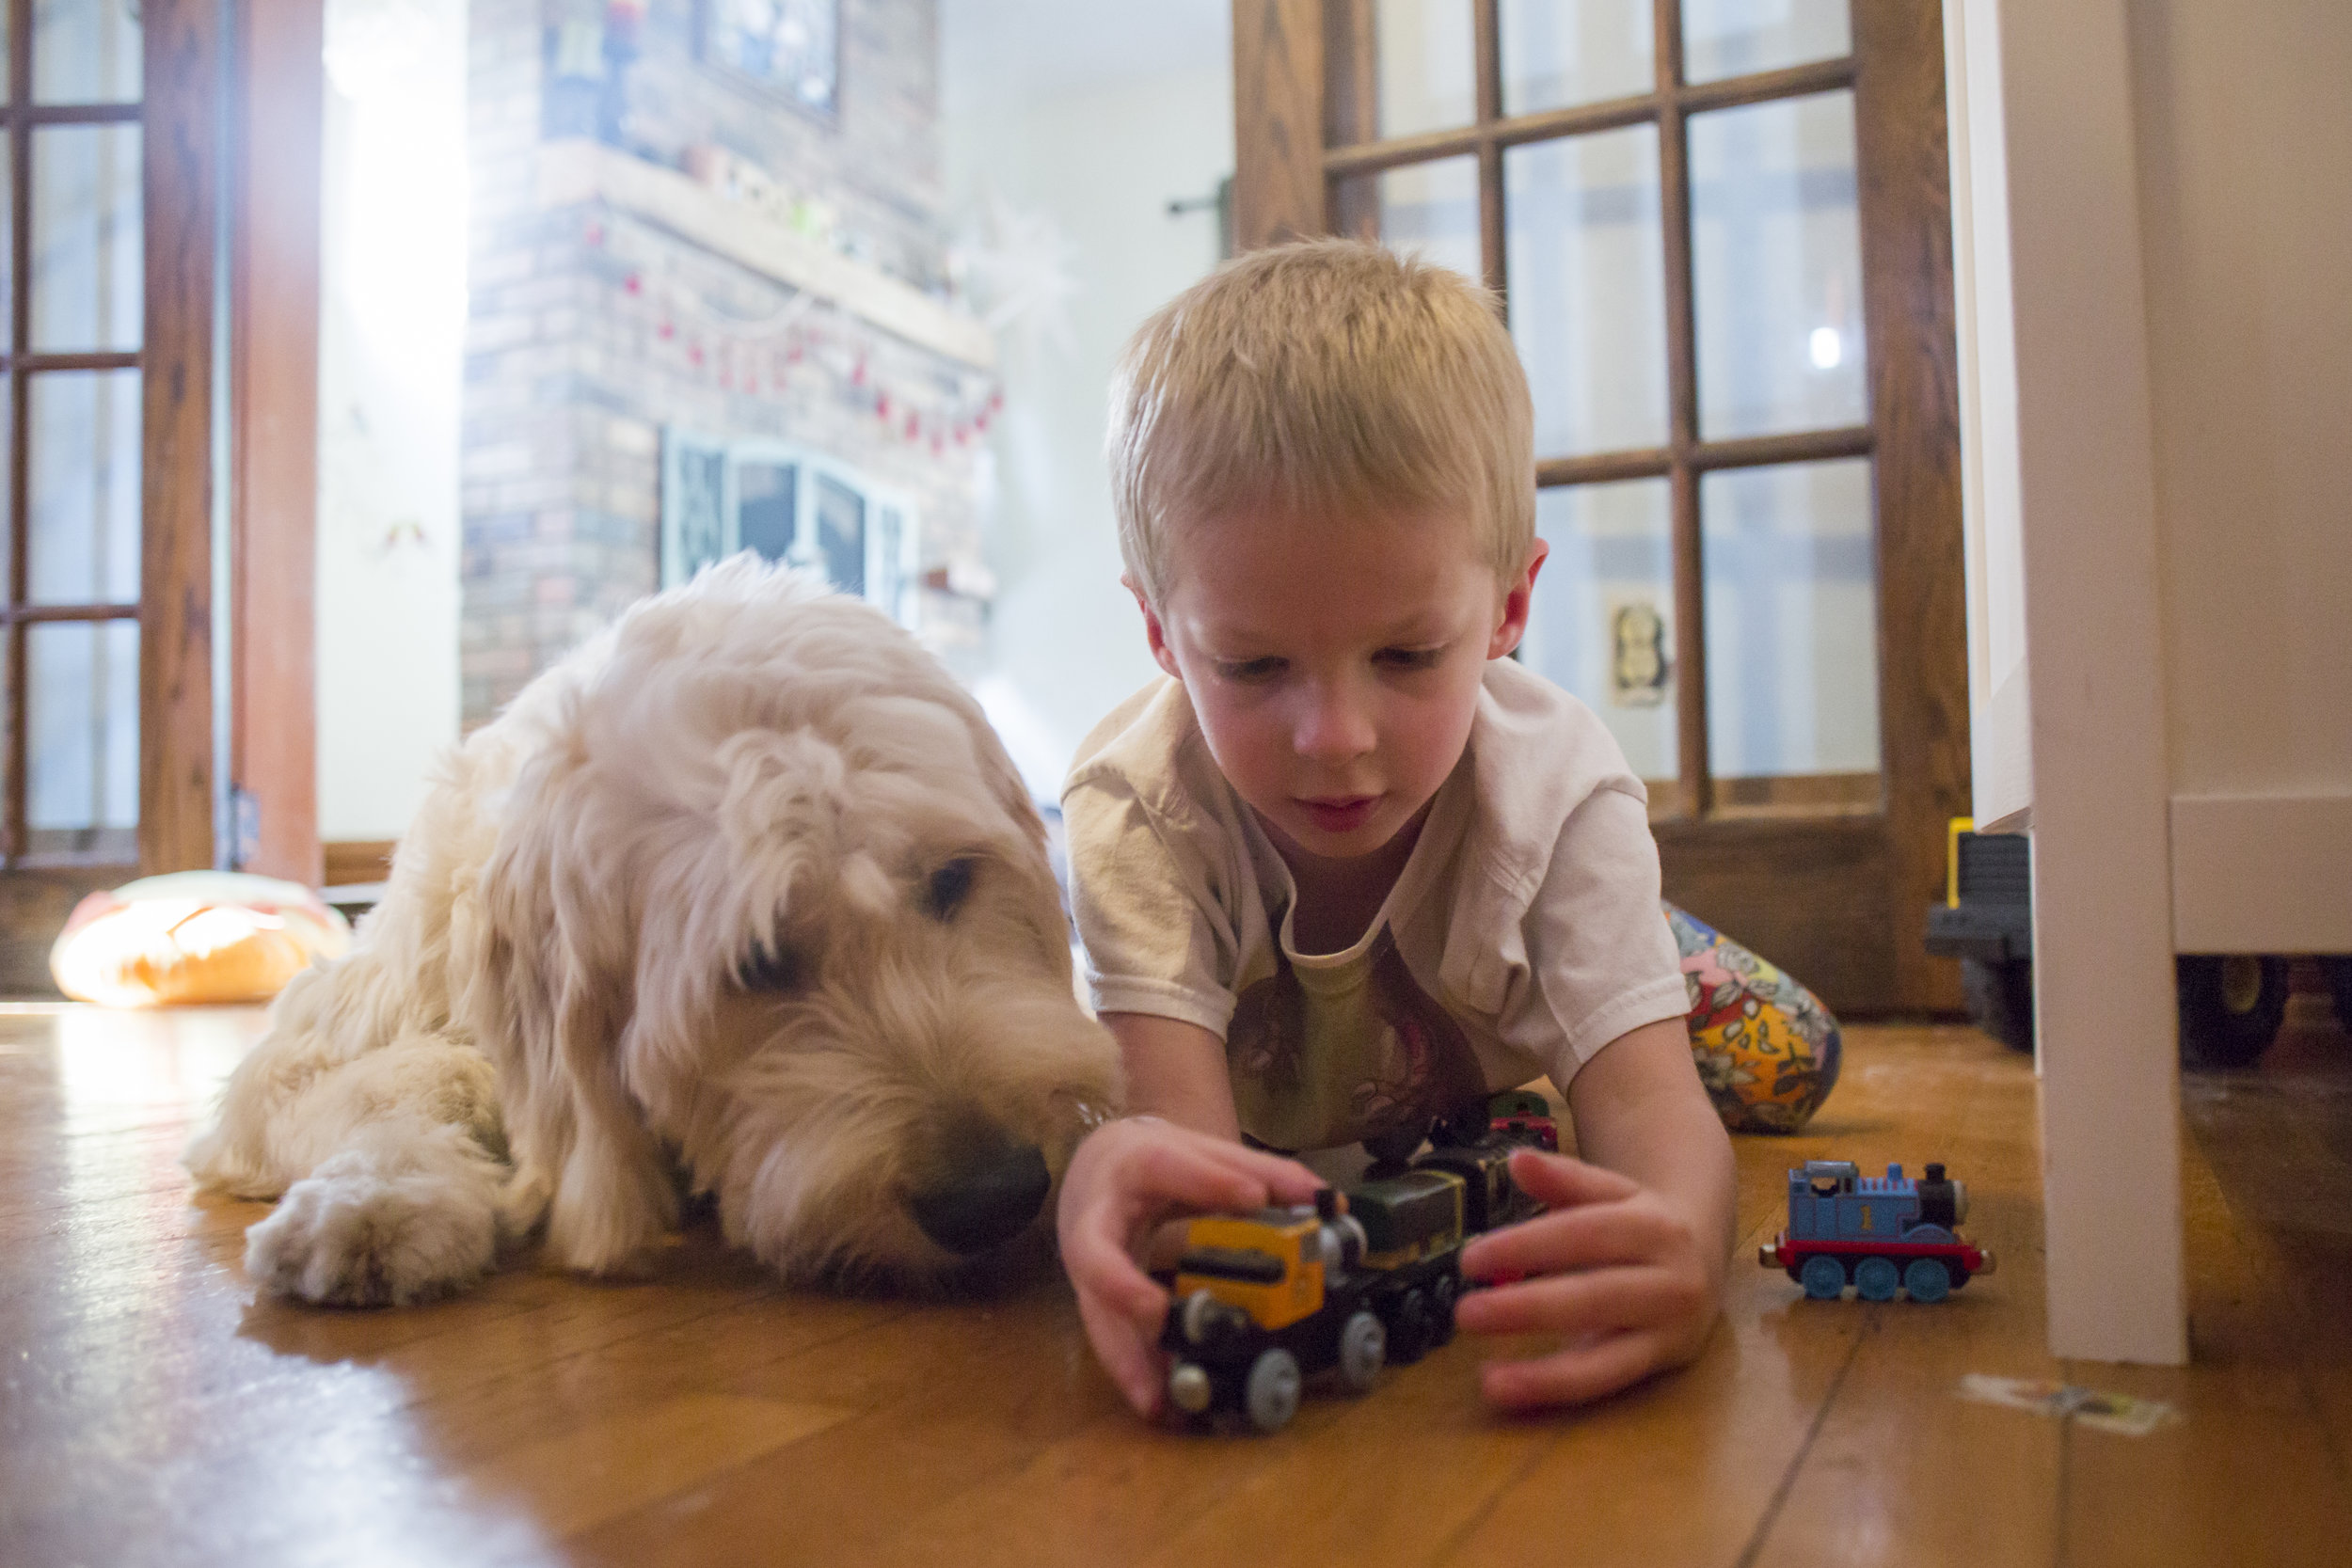  Spad and Josiah lay on the floor together while Josiah plays with his  toy trains. Josiah's mother said she's noticed that Josiah will be more affectionate towards Spad and interact with him more when he doesn't think anyone's watching. This include